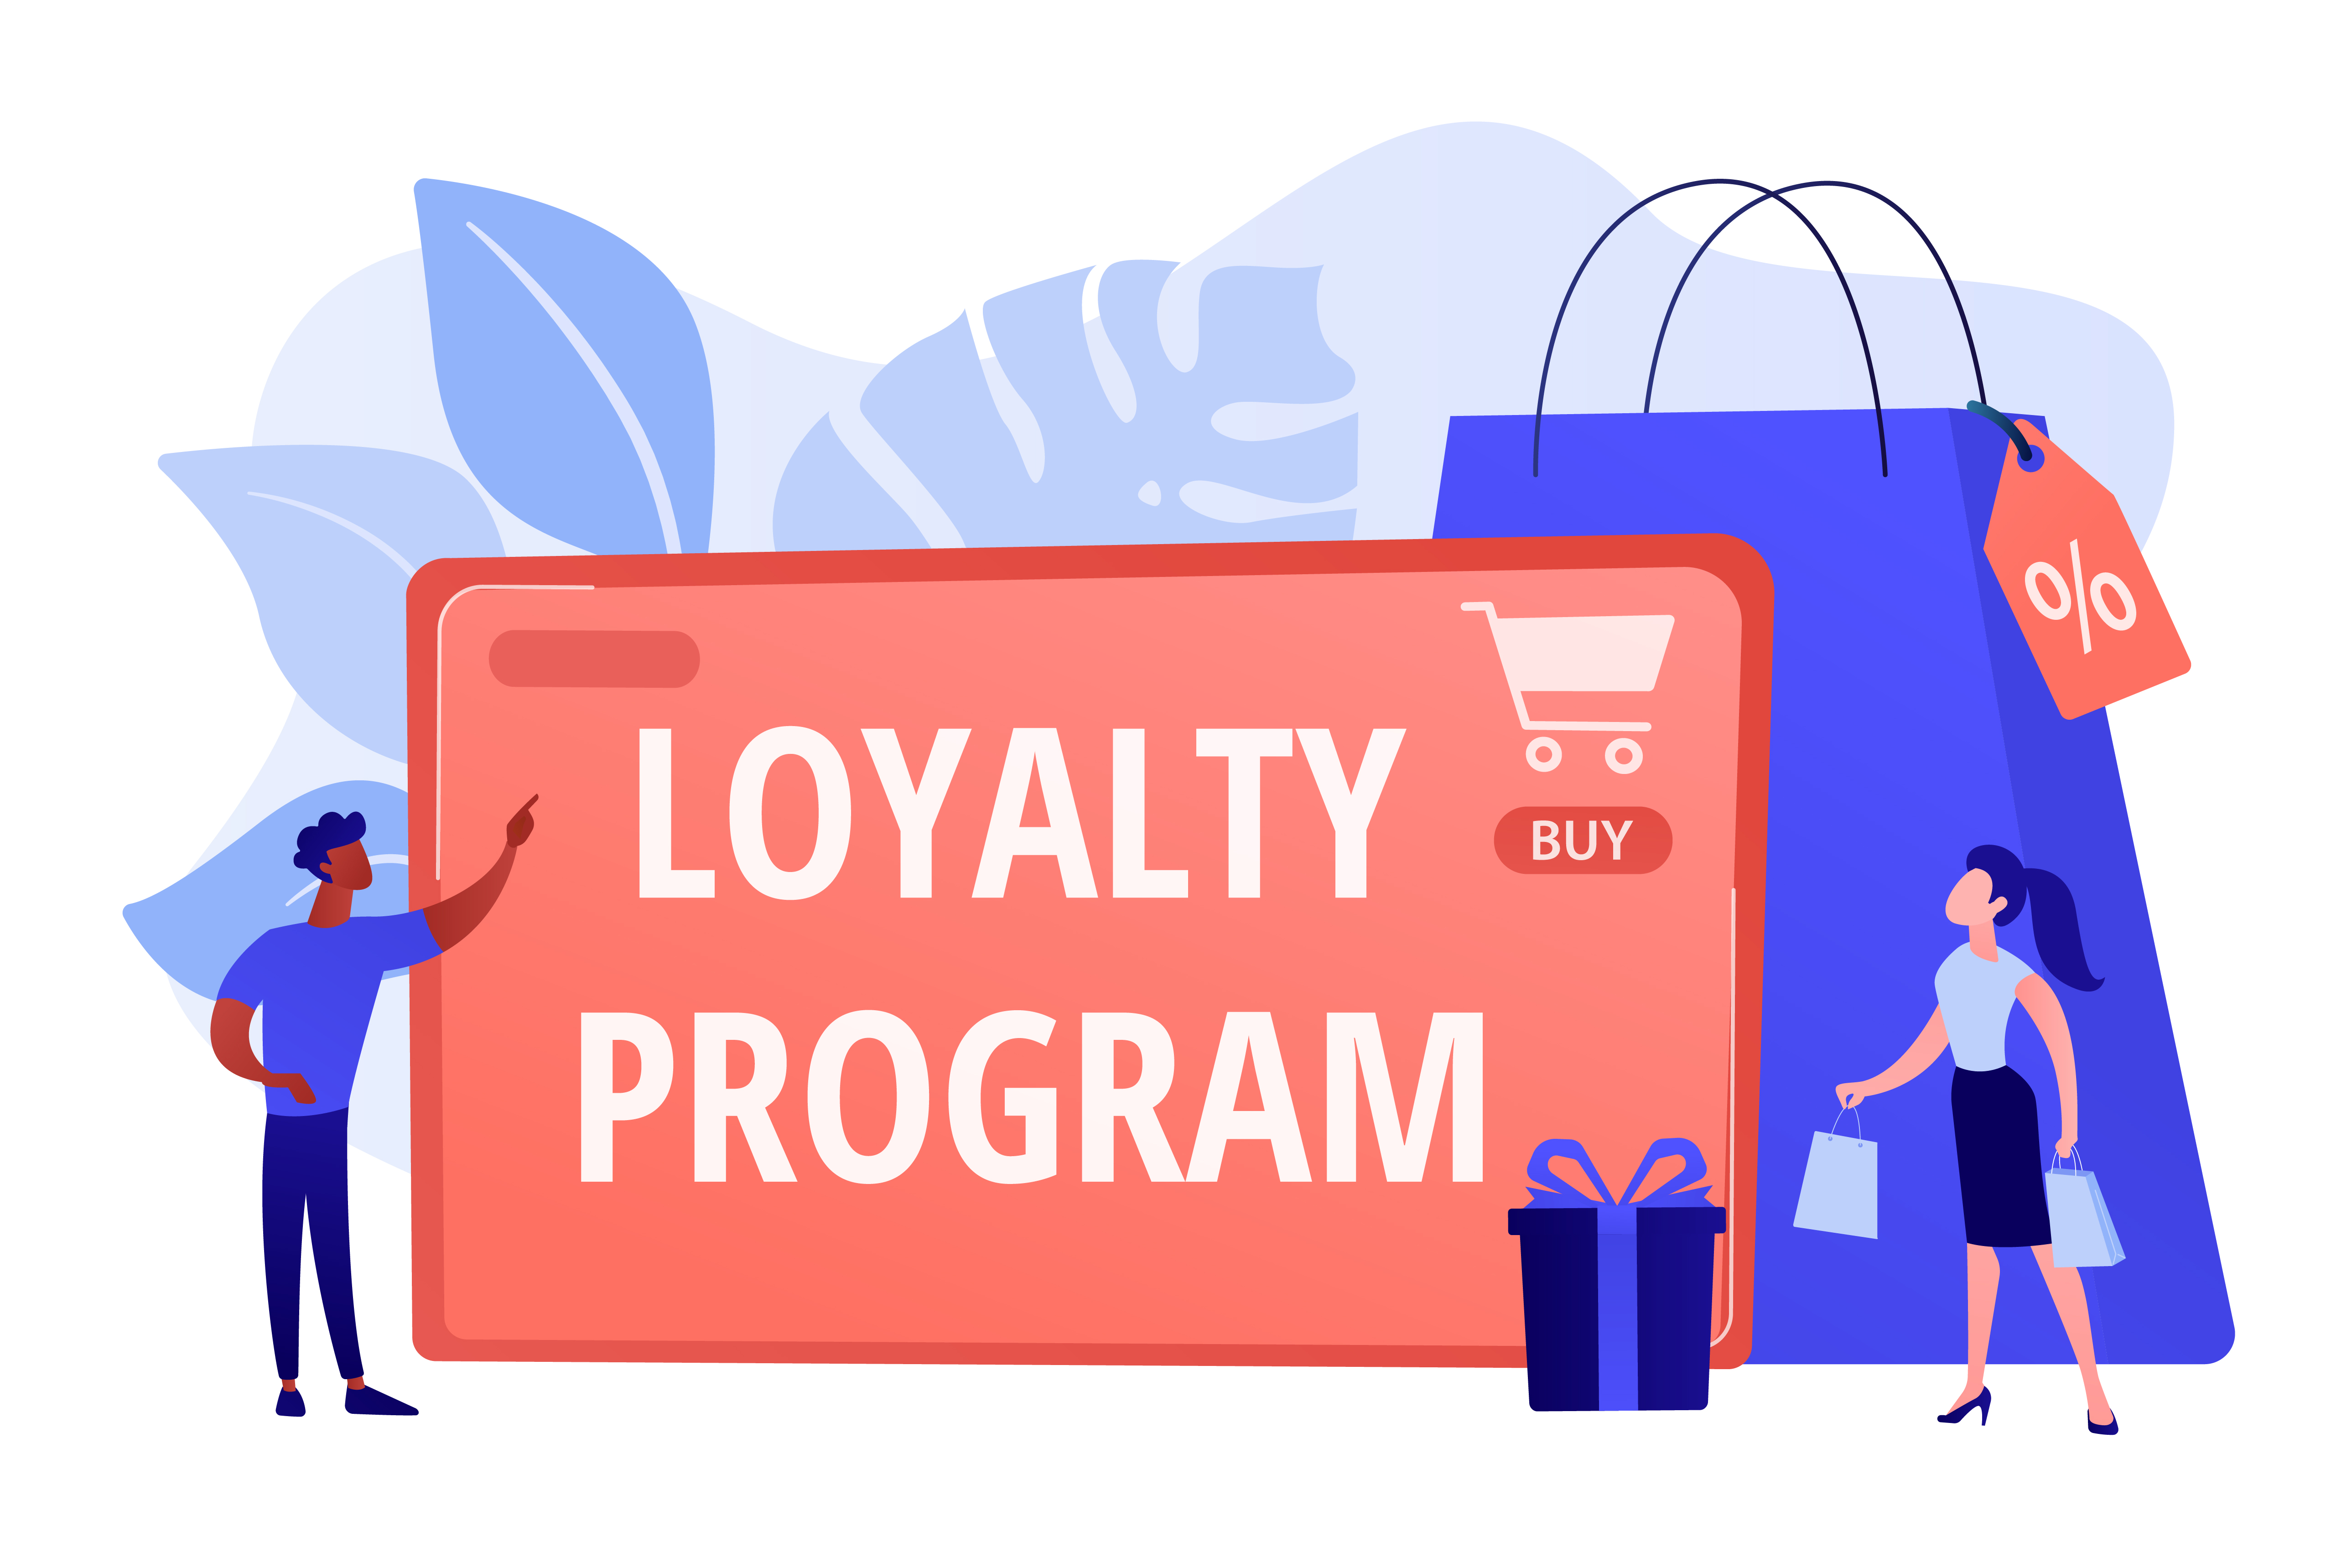 Retailers are boosting loyalty programs to capitalize on bargain-hunting consumers in Australia